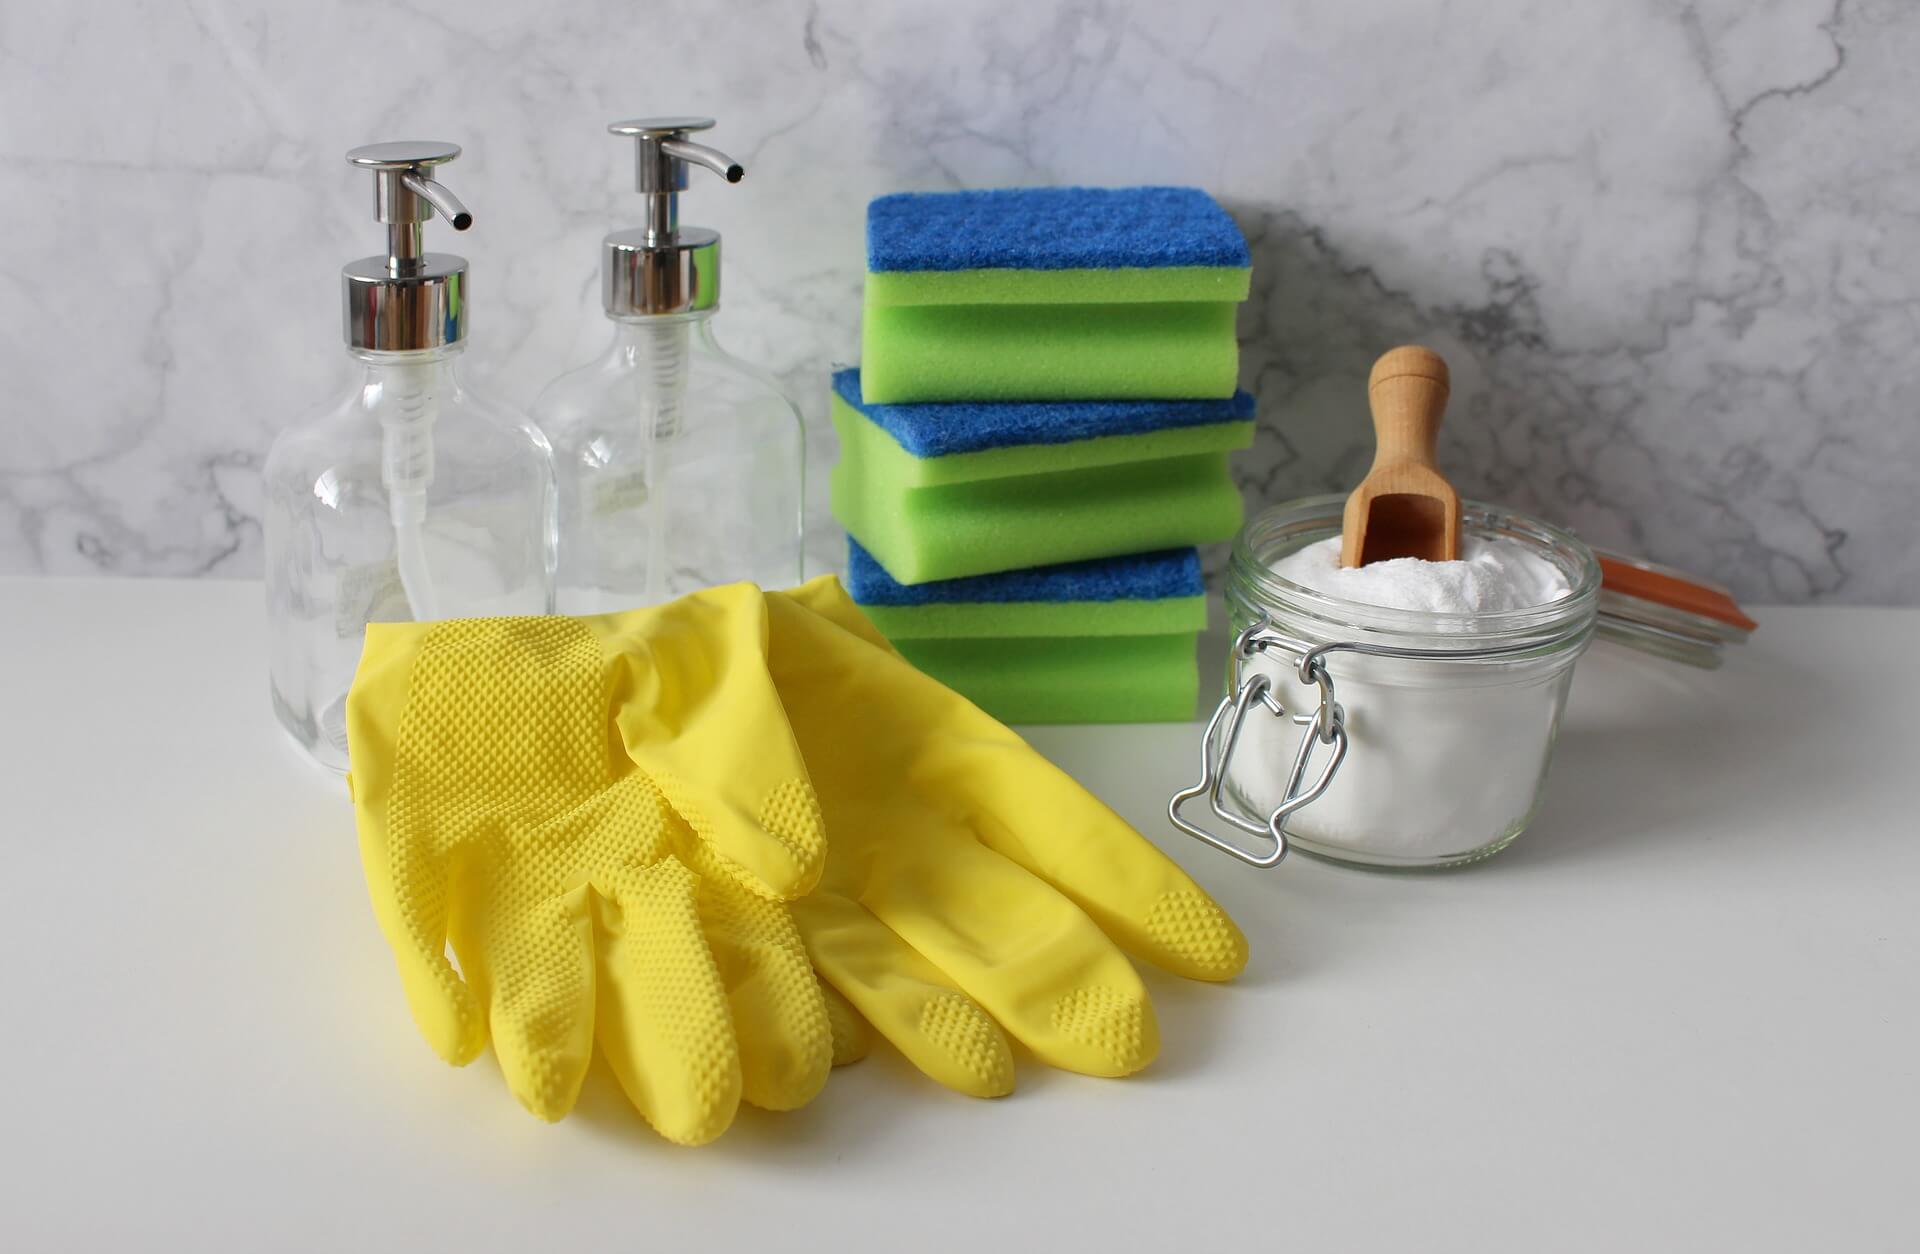 Tips for Cleaning a Soap Dispenser